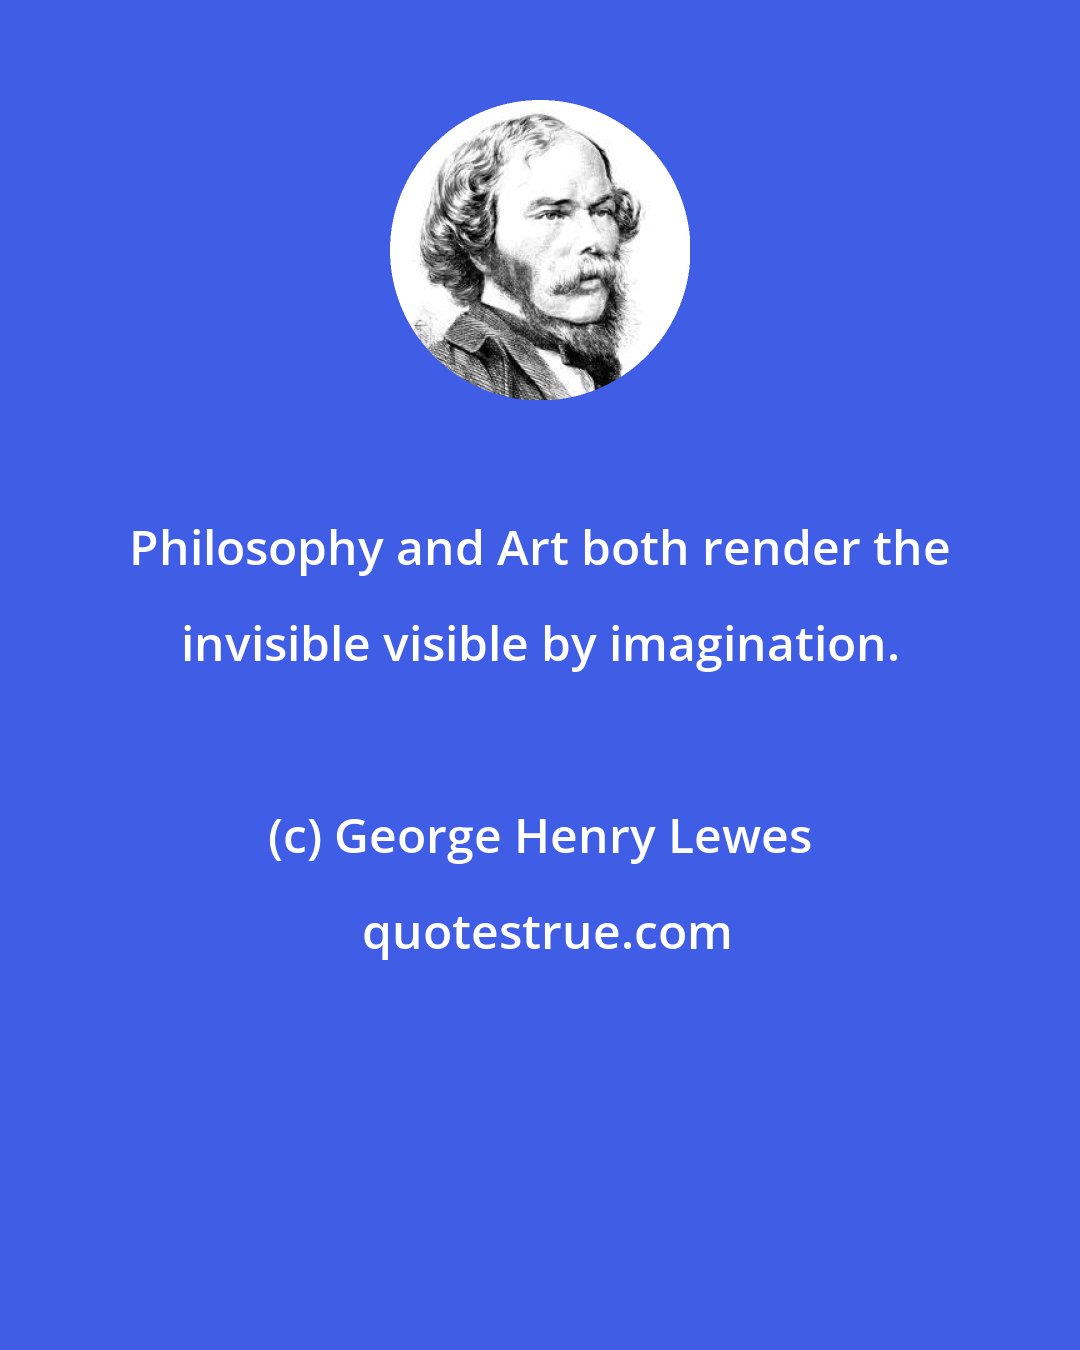 George Henry Lewes: Philosophy and Art both render the invisible visible by imagination.